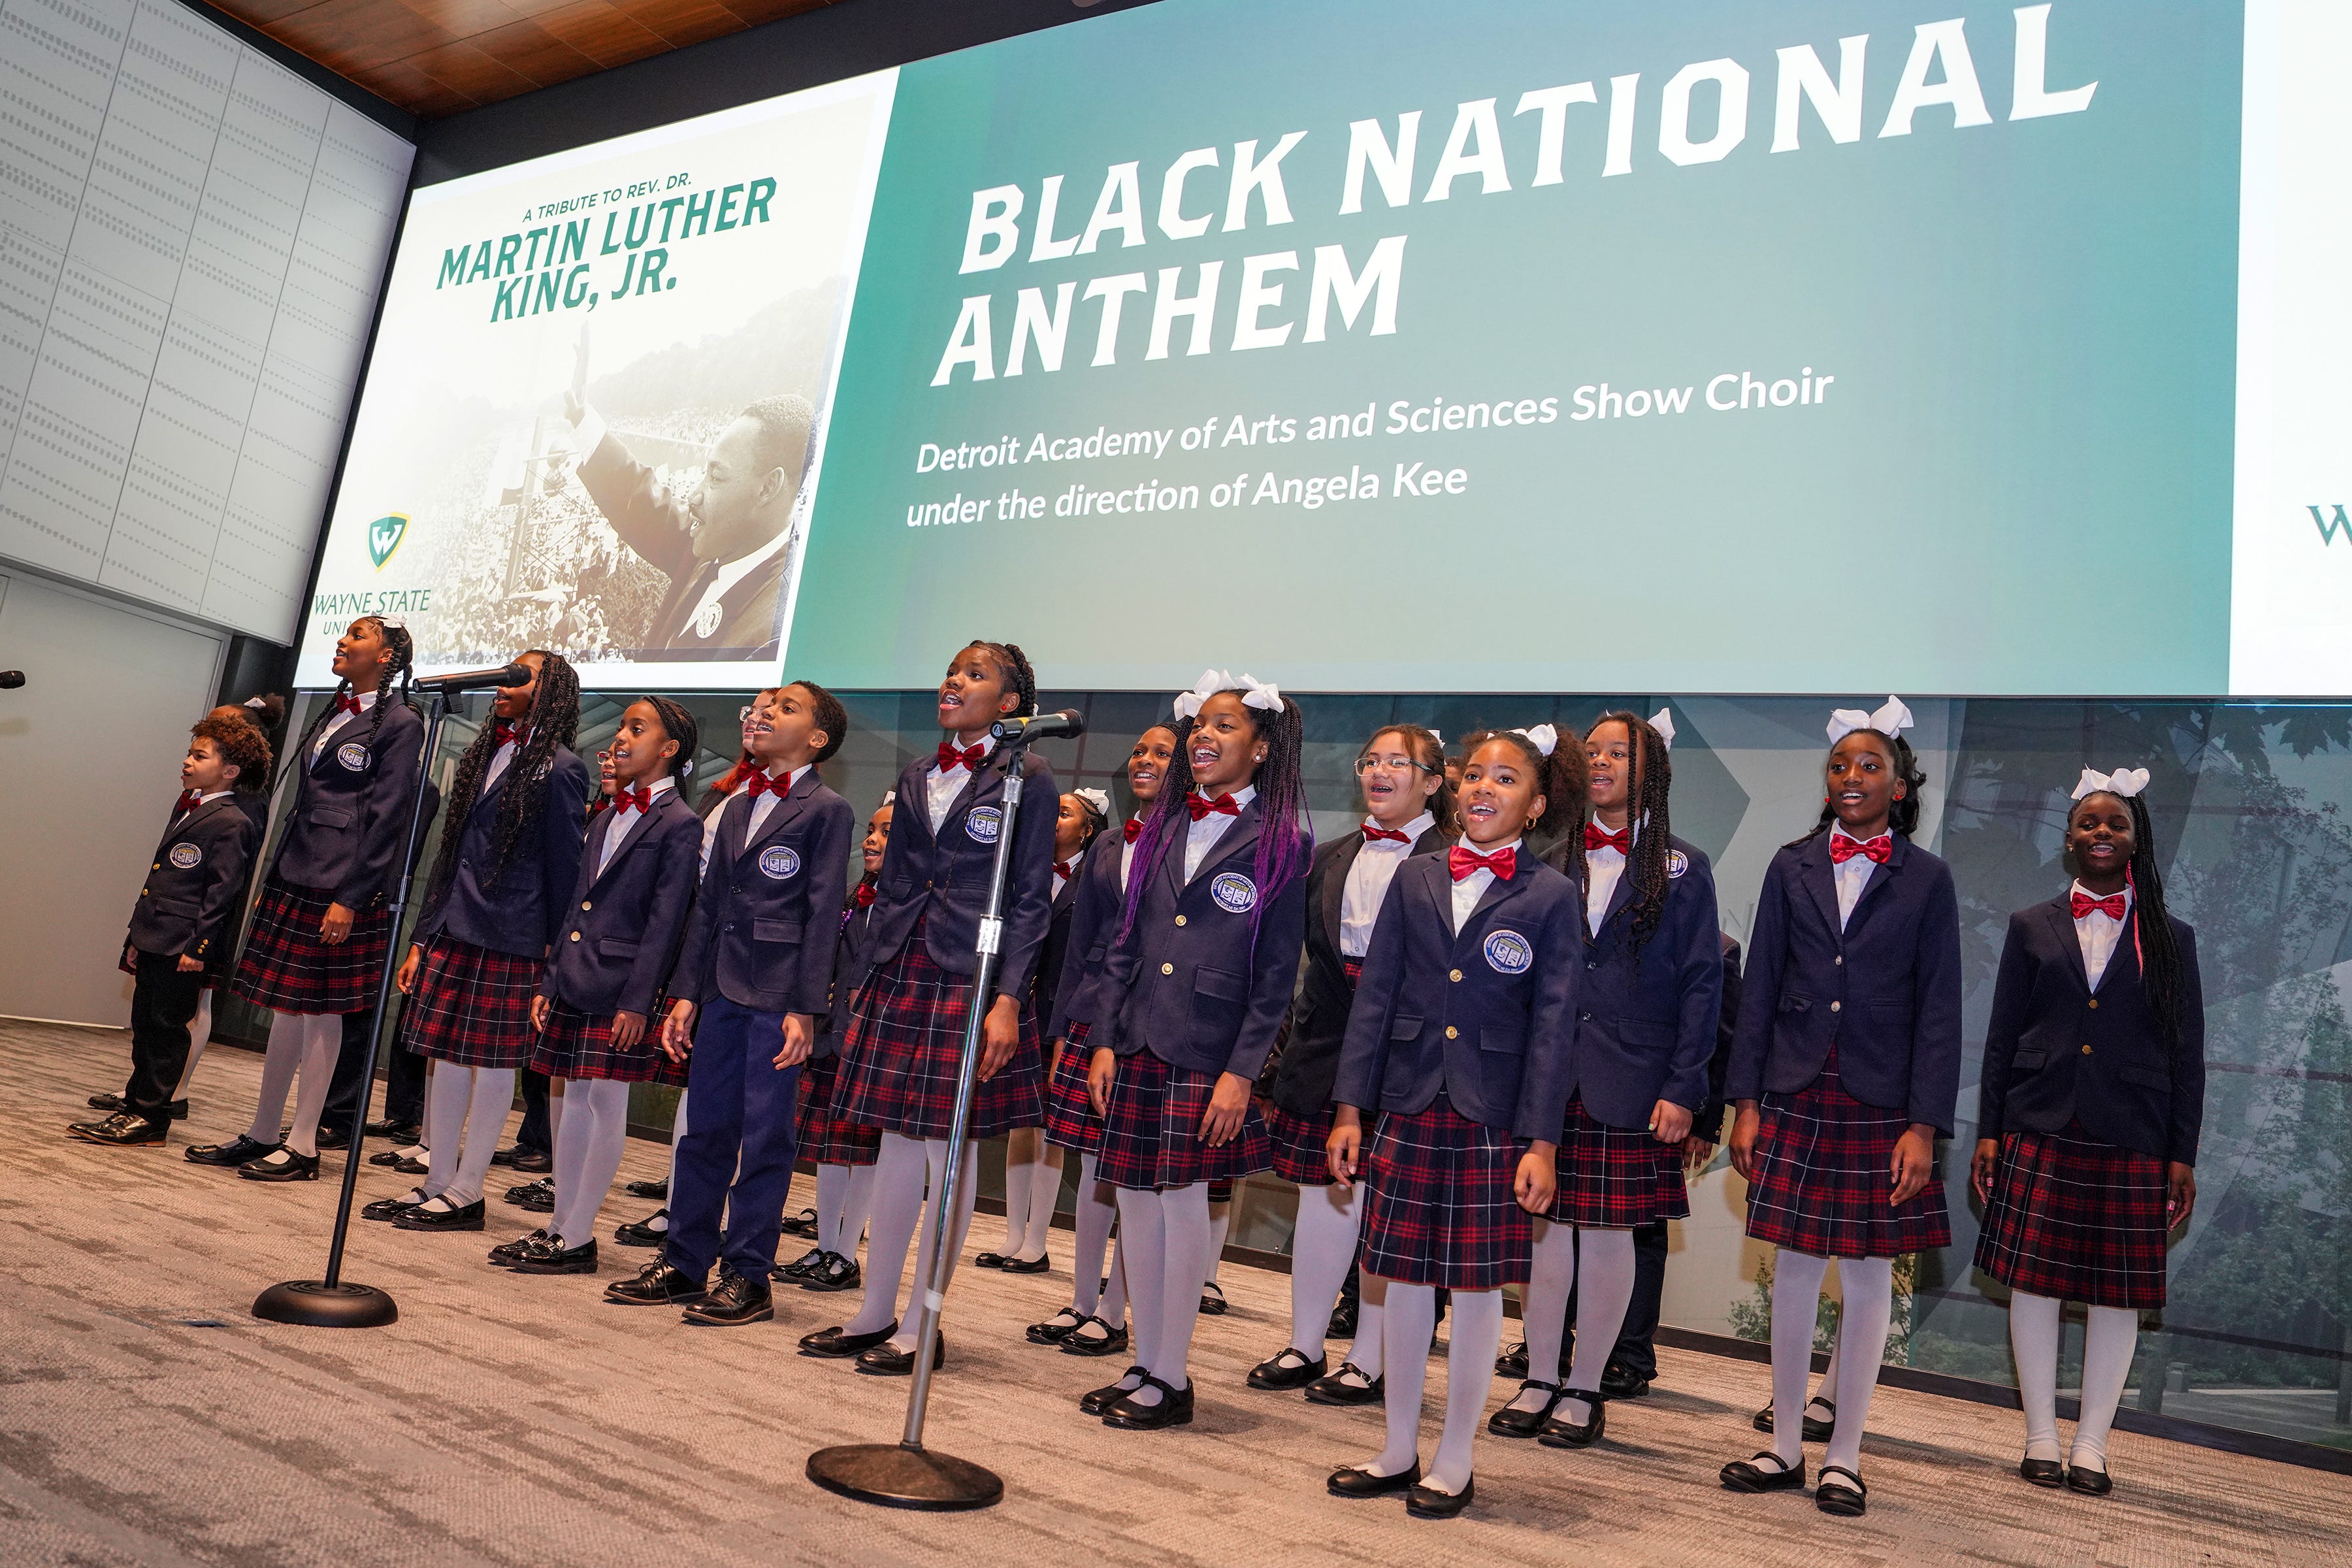 The Detroit Academy of Arts Show Choir, under the direction of Angela Kee, performed James Weldon Johnson's "Lift Every Voice and Sing," popularly known as the "Black National Anthem" on Jan. 13th during "A Tribute to Rev. Dr. Martin Luther King Jr."  program, presented by Wayne State University.